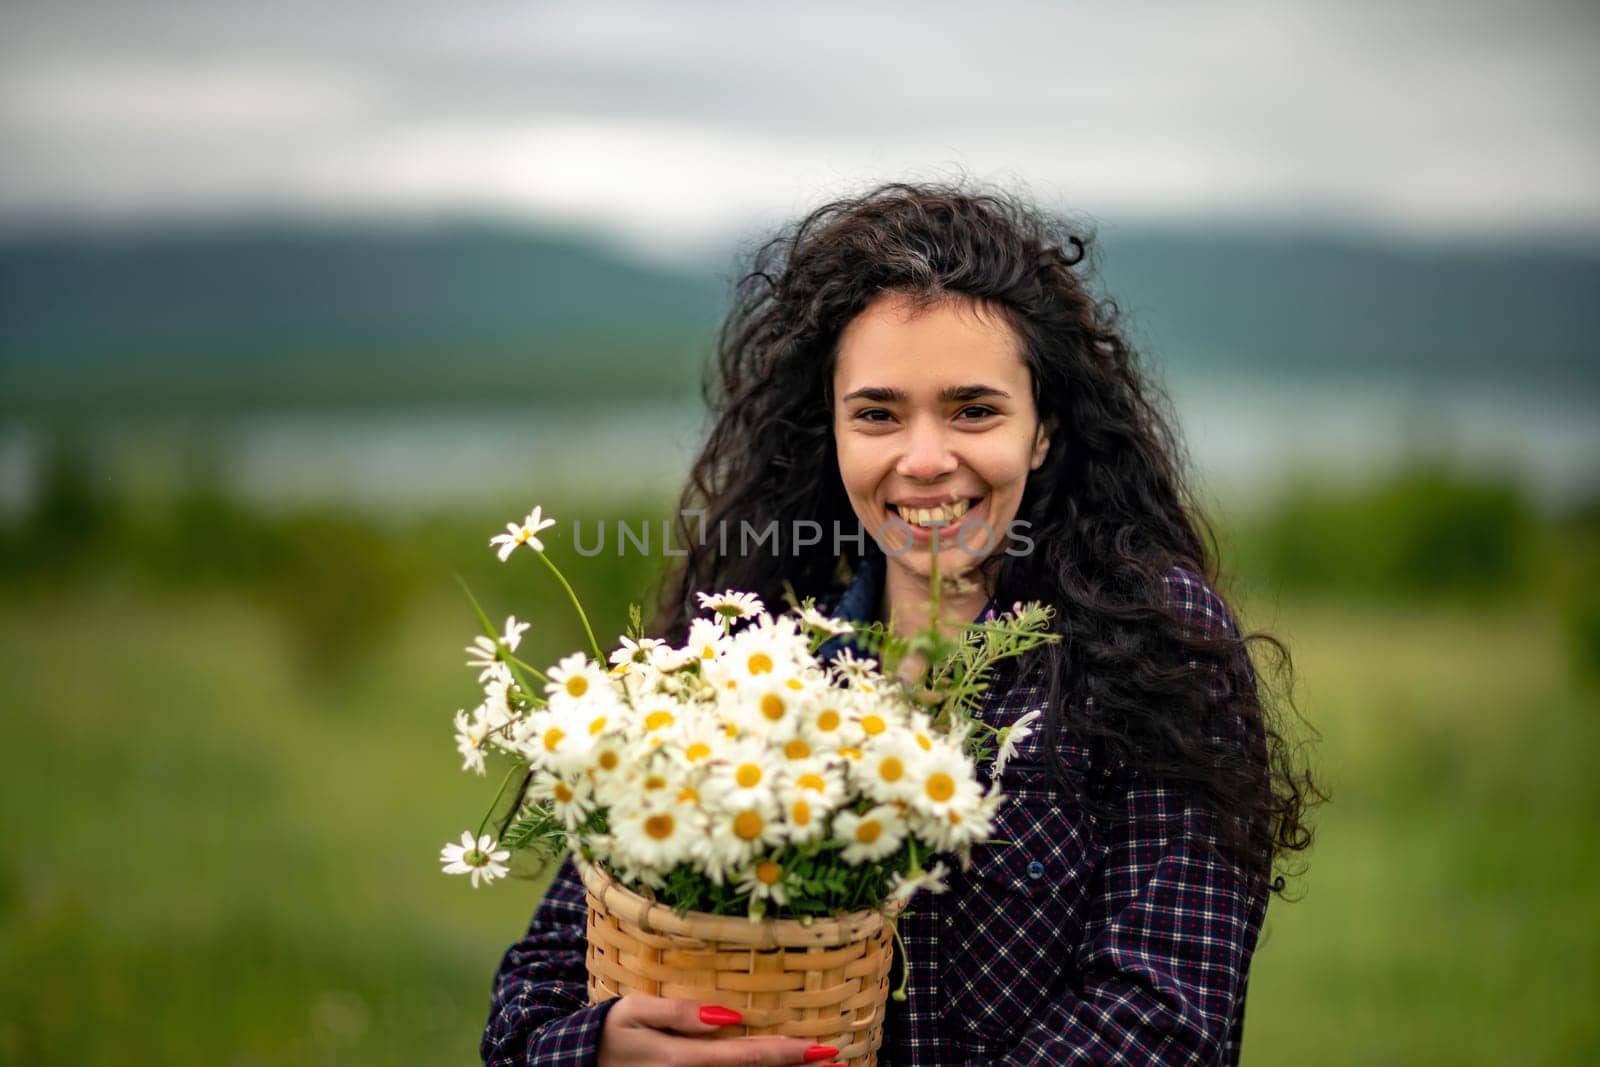 A woman stands on a green field and holds a basket with a large bouquet of daisies in her hands. In the background are mountains and a lake